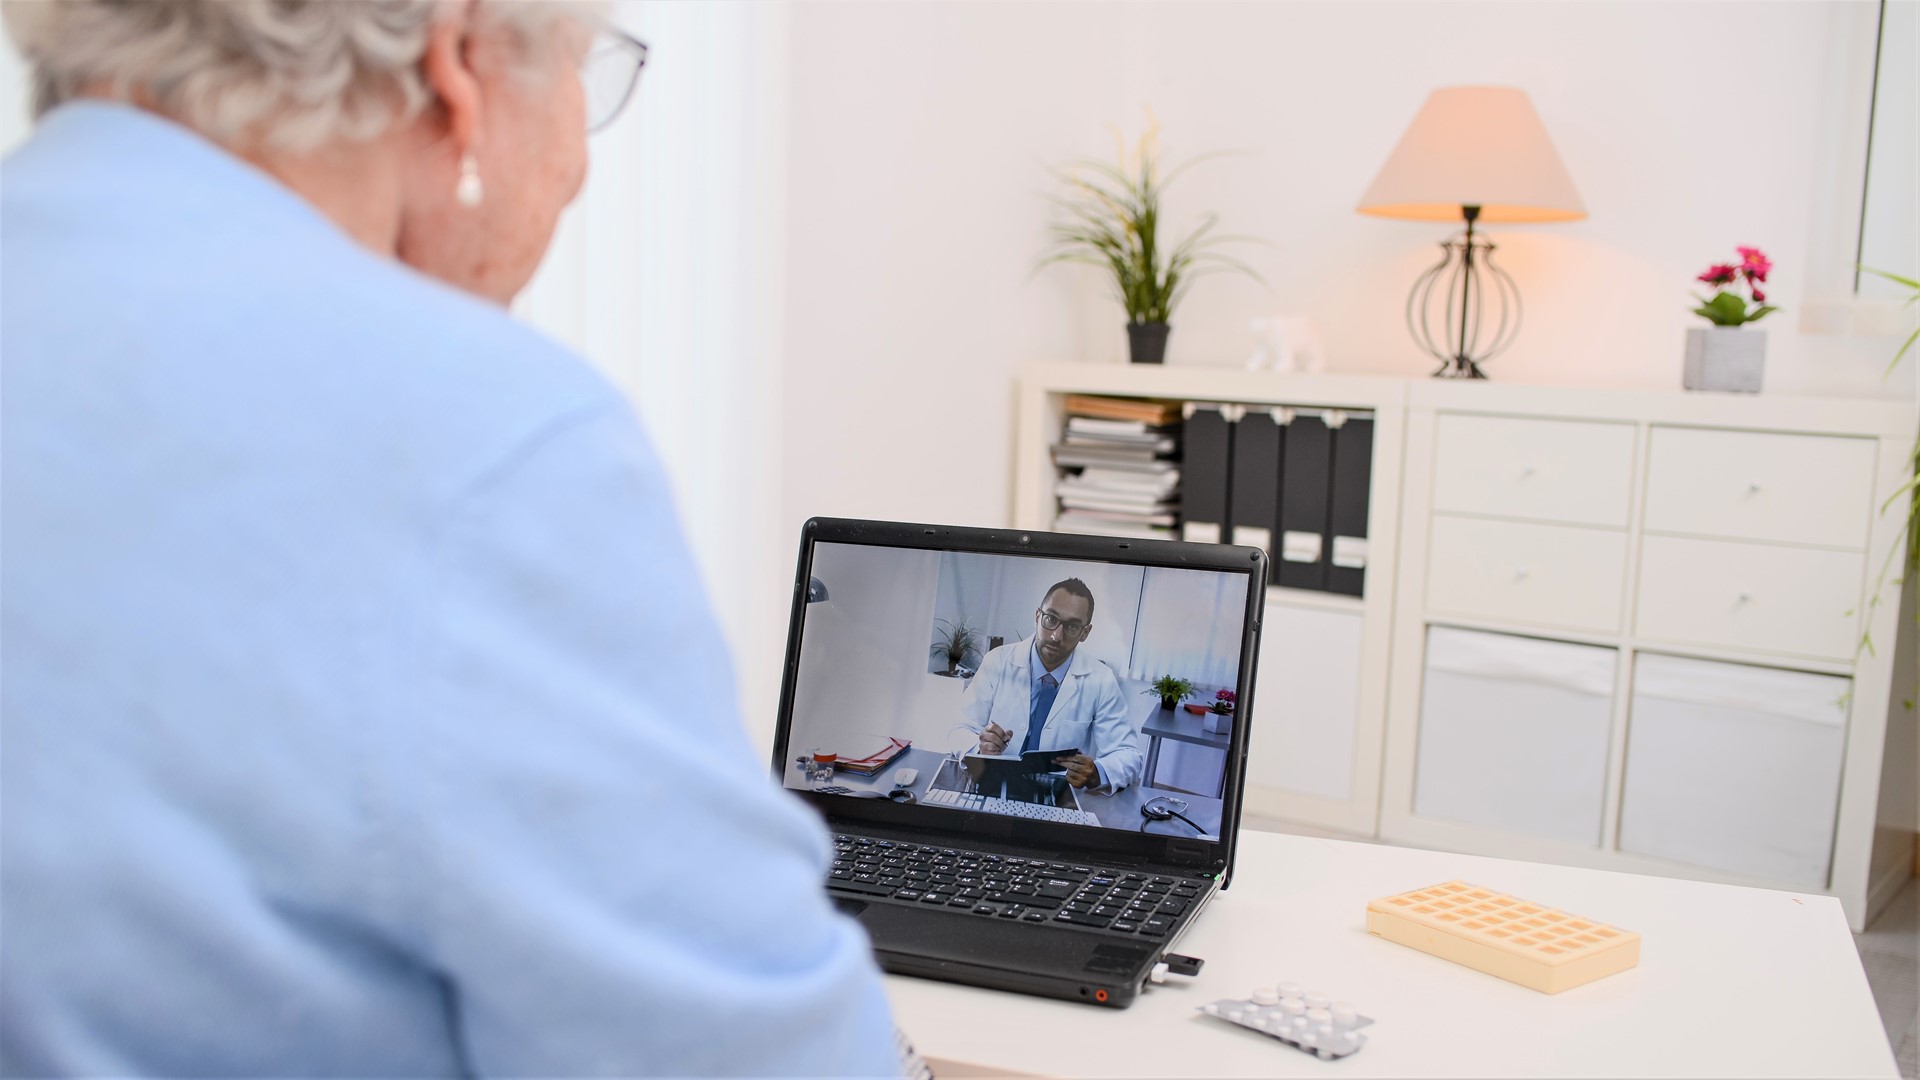 Virtual is now reality as doctors and patients are connecting remotely during the COVID-19 pandemic. Sponsored by Premera